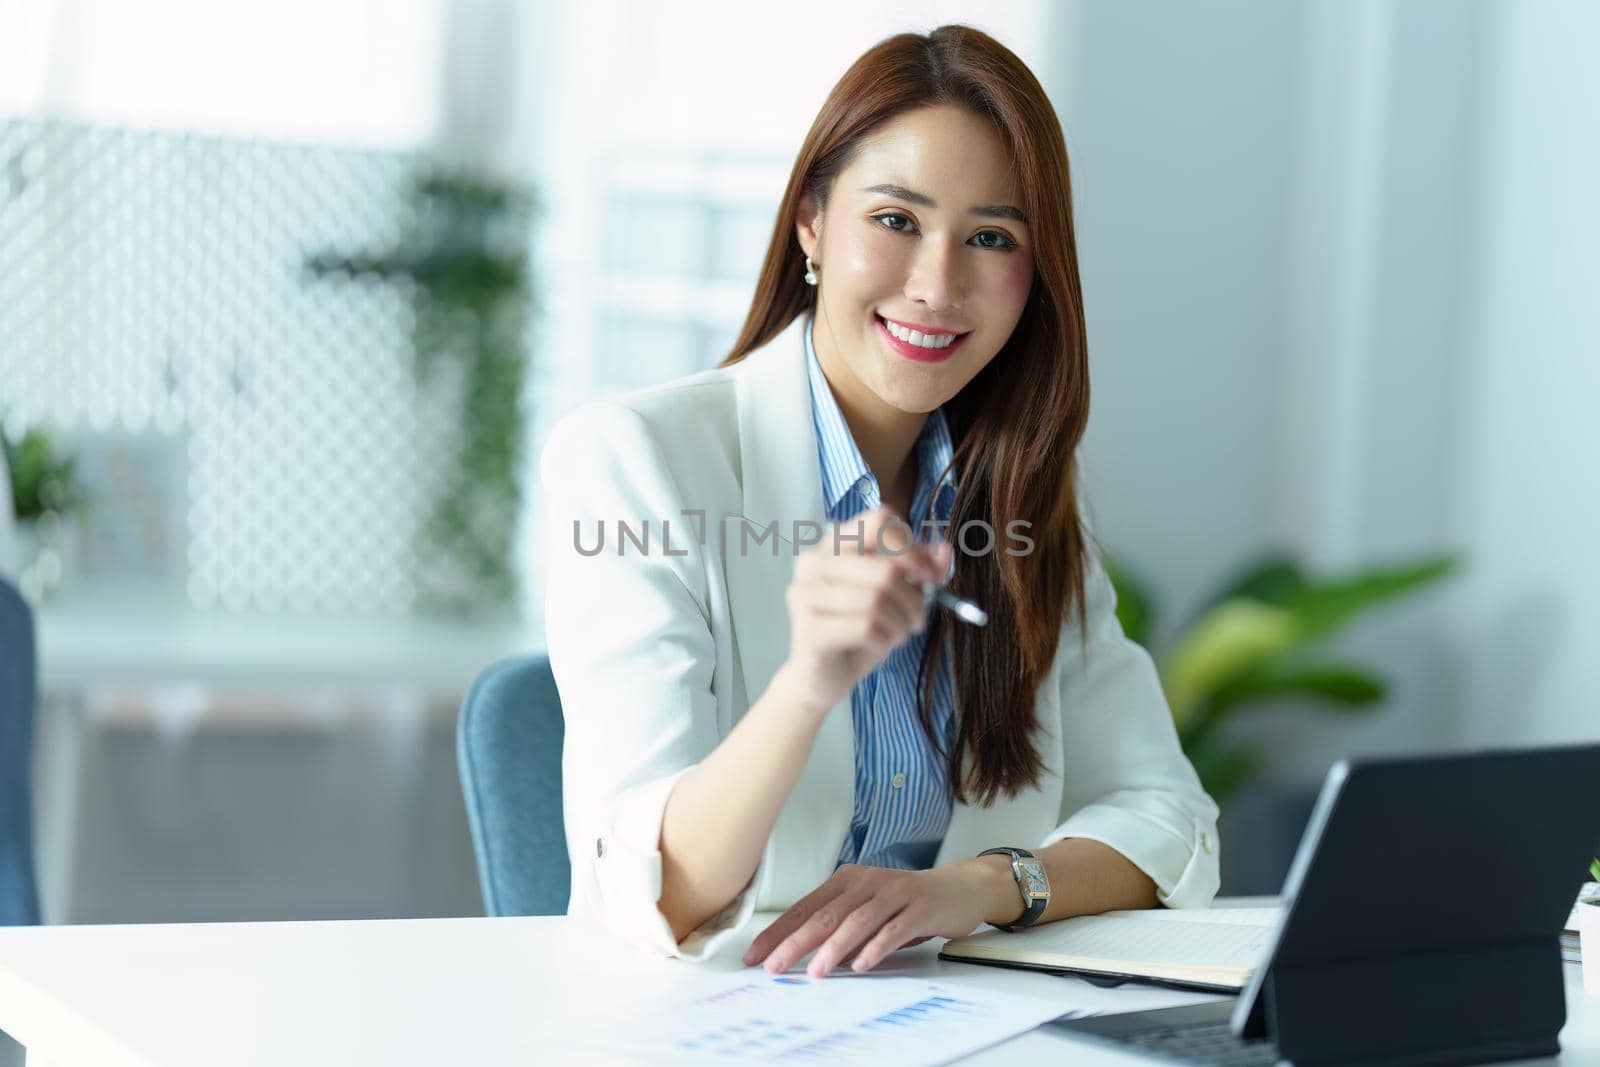 Portrait of an Asian business woman sitting at work and using a tablet computer in the office by Manastrong